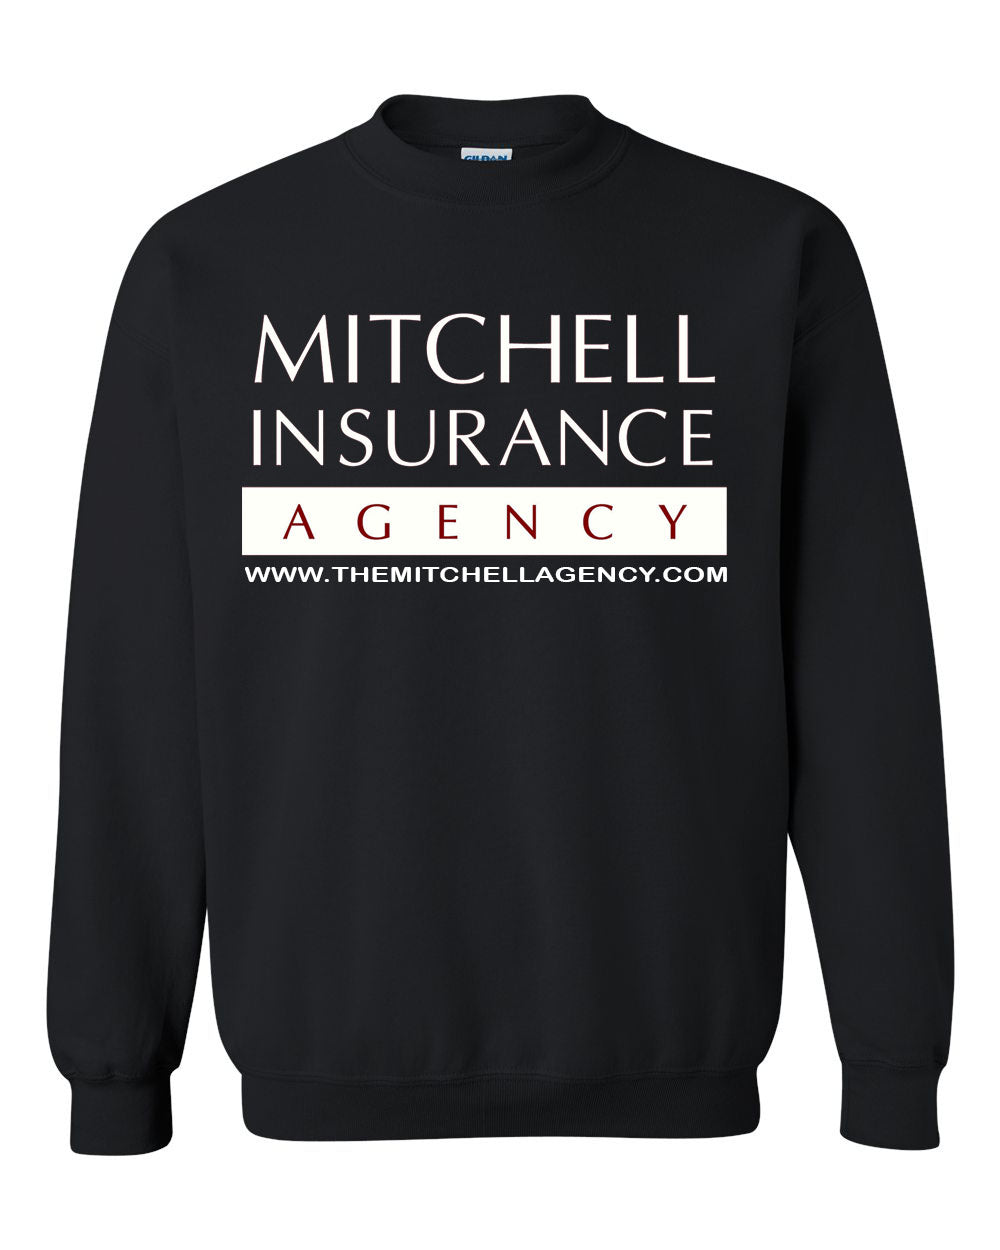 Mitchell Agency Front non hooded sweatshirt